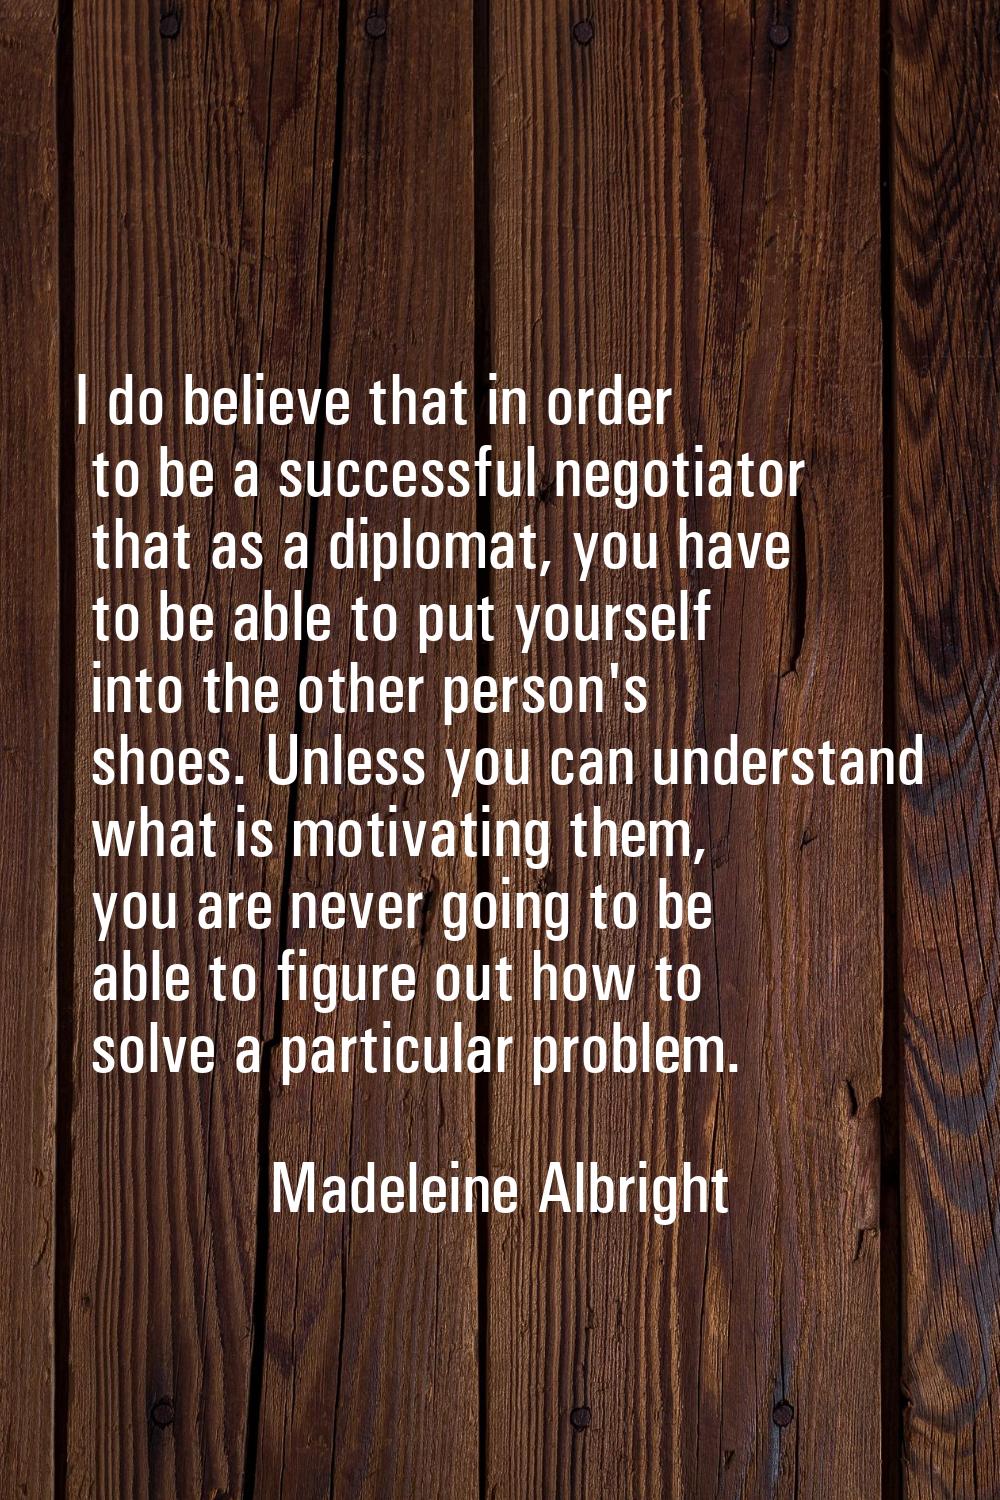 I do believe that in order to be a successful negotiator that as a diplomat, you have to be able to